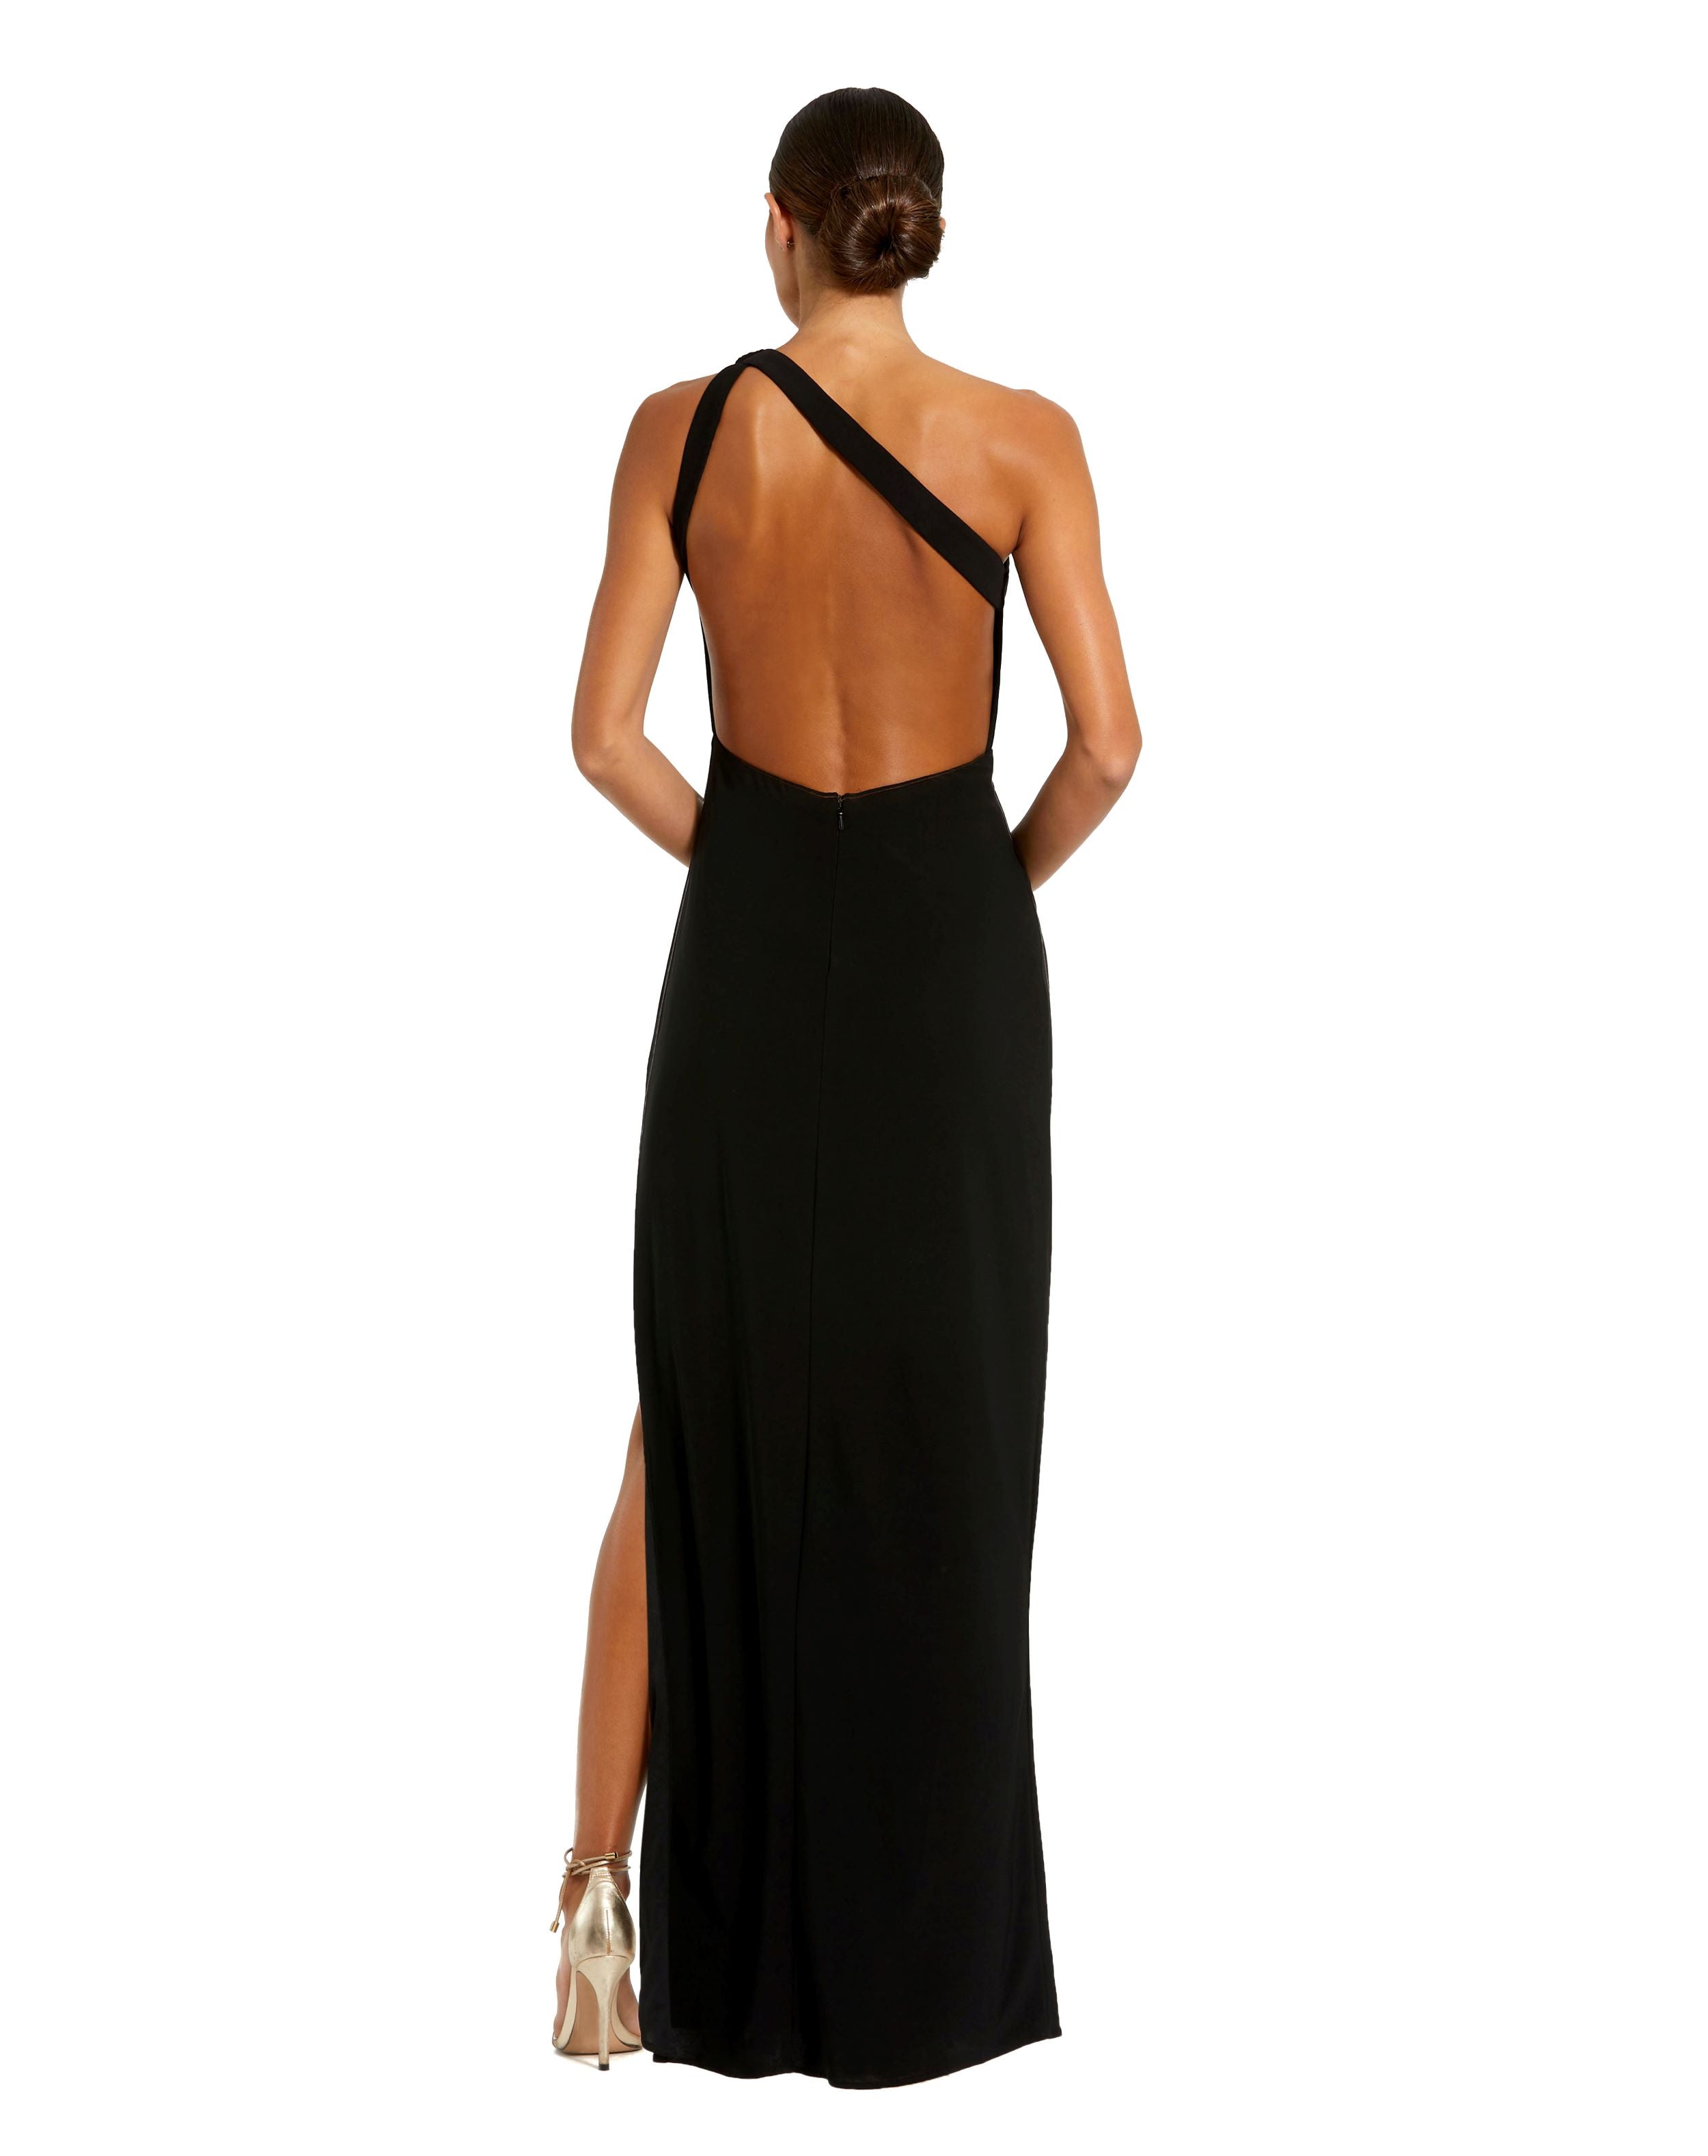 One Shoulder Gown with Sheer Embellished Cut Out